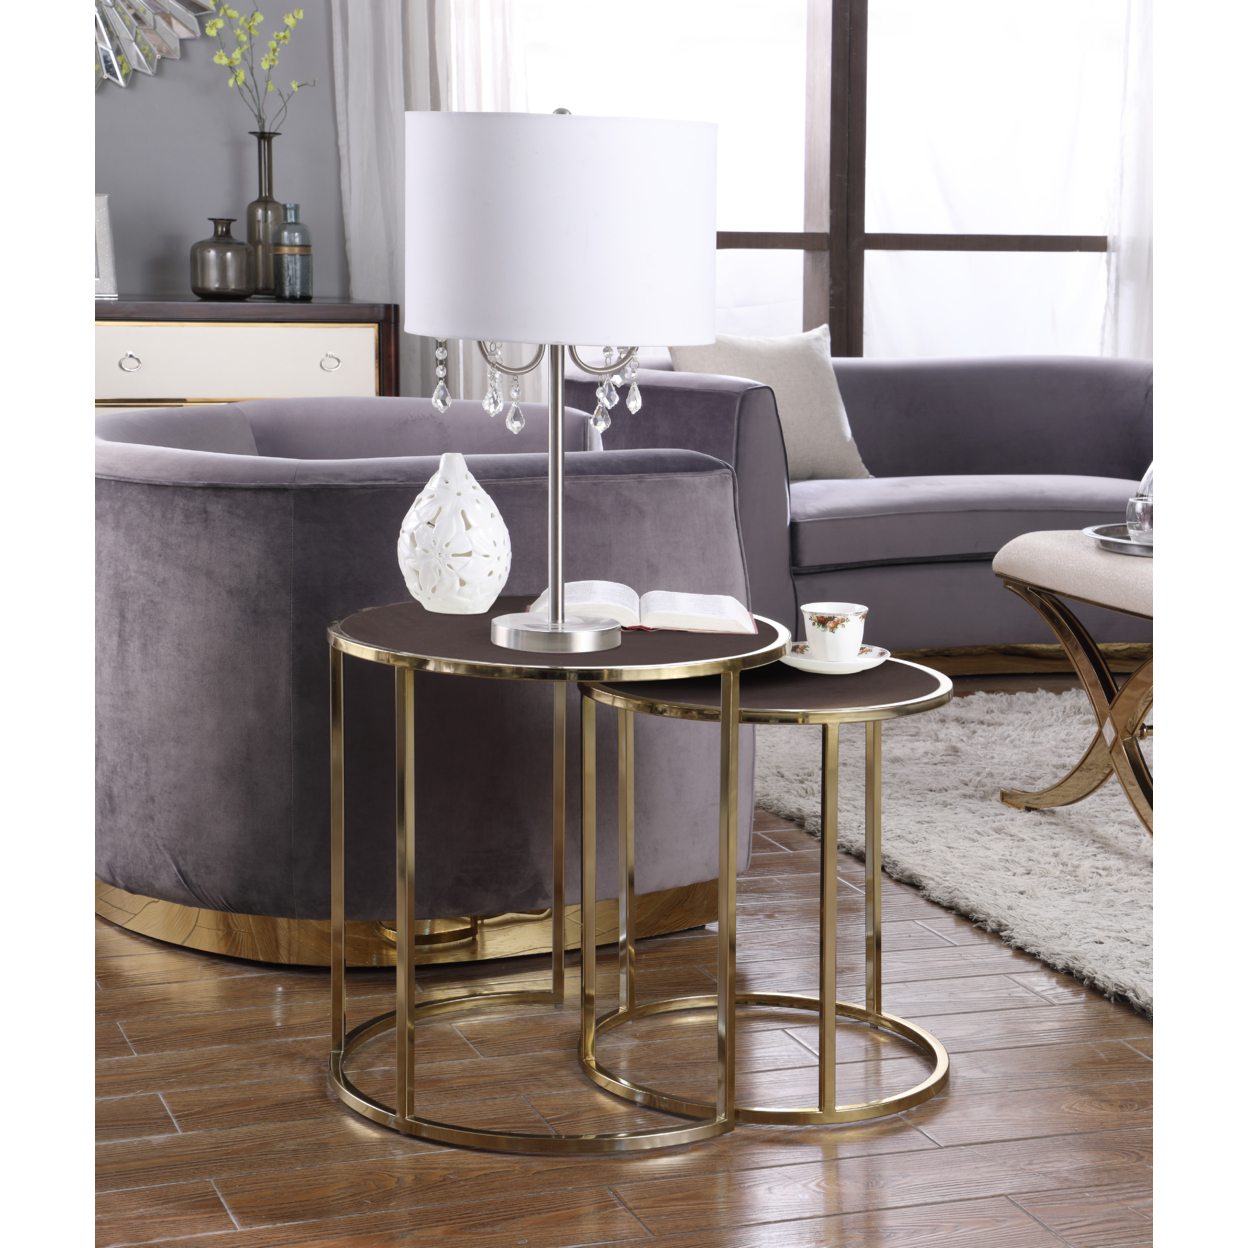 Blayne Nightstand Side Table 2 Piece Set Gold Finished Gibbous Moon Frame PU Leather Top - Grey